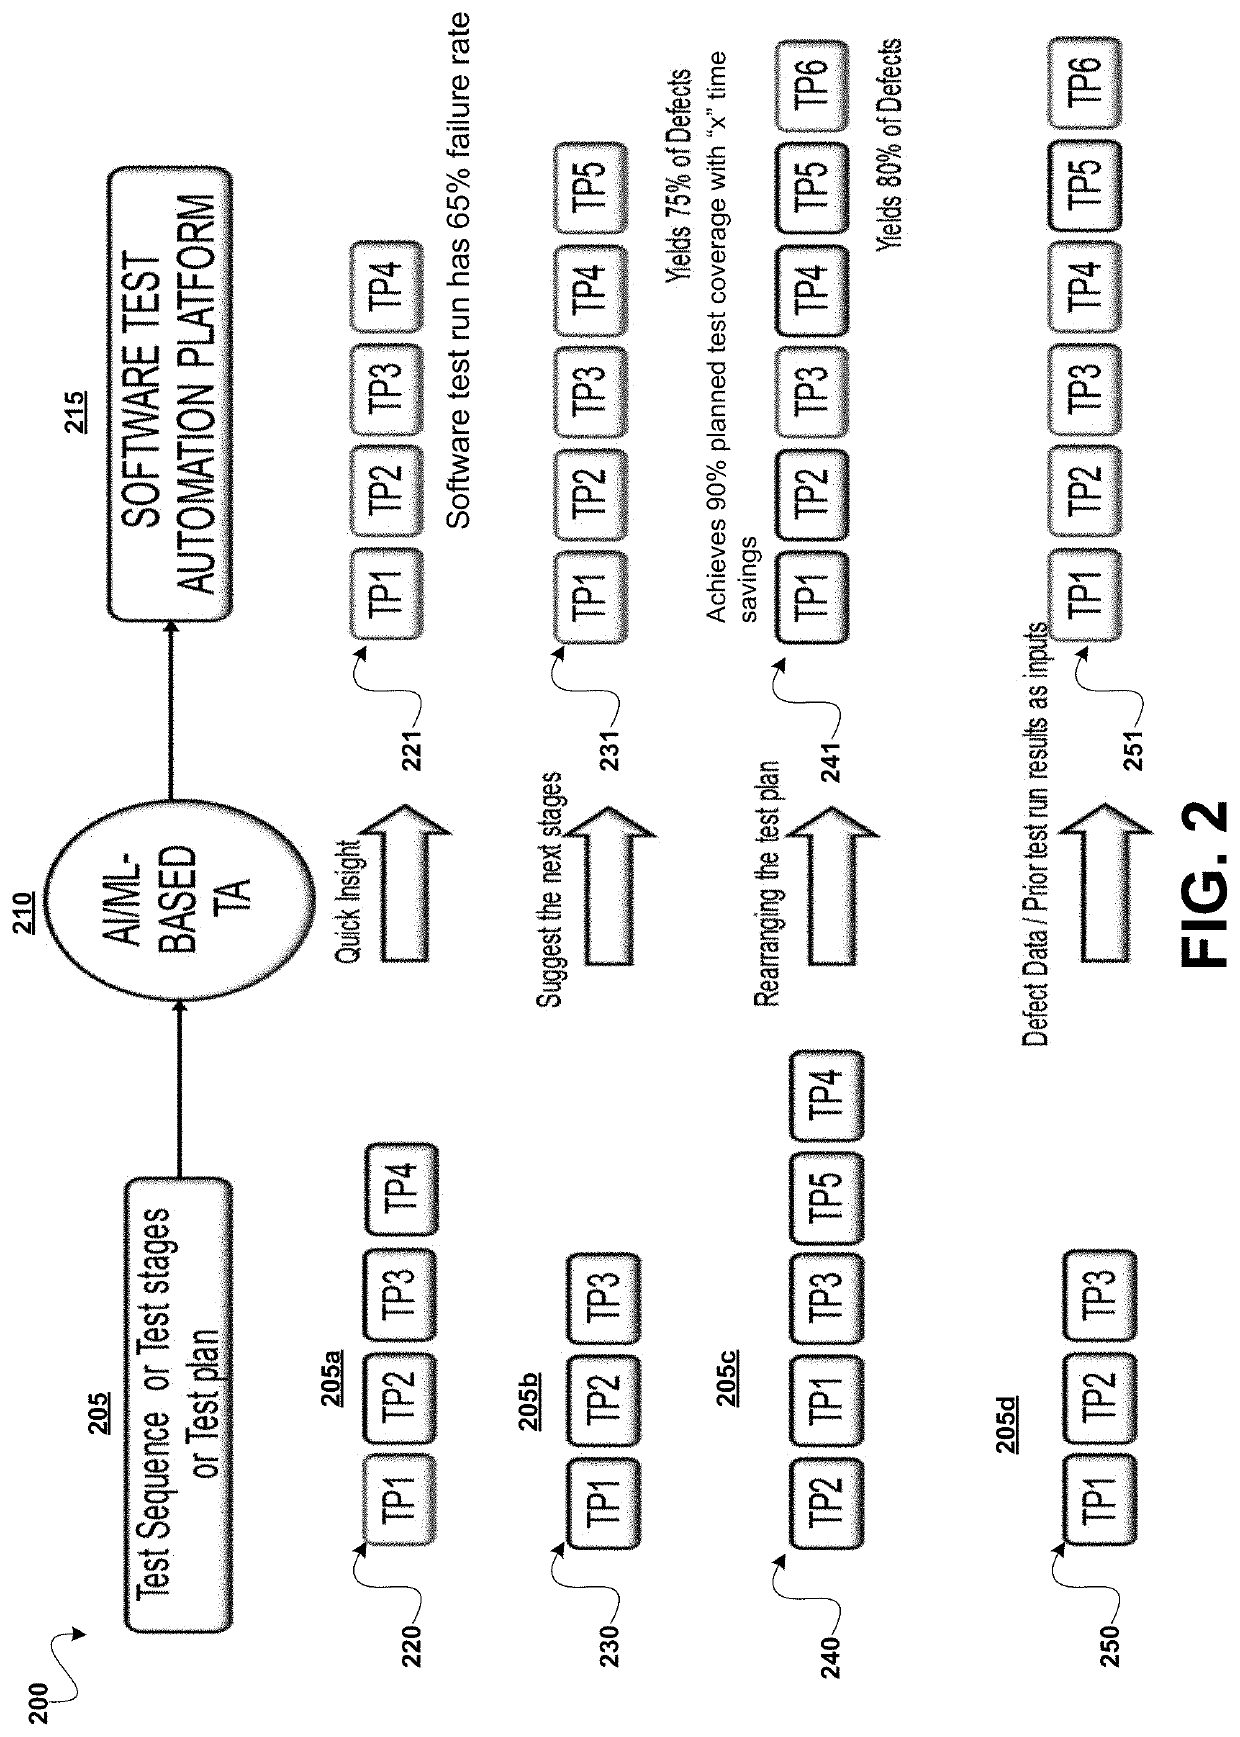 System and methods for amalgamation of artificial intelligence (AI) and machine learning (ML) in test creation, execution, and prediction